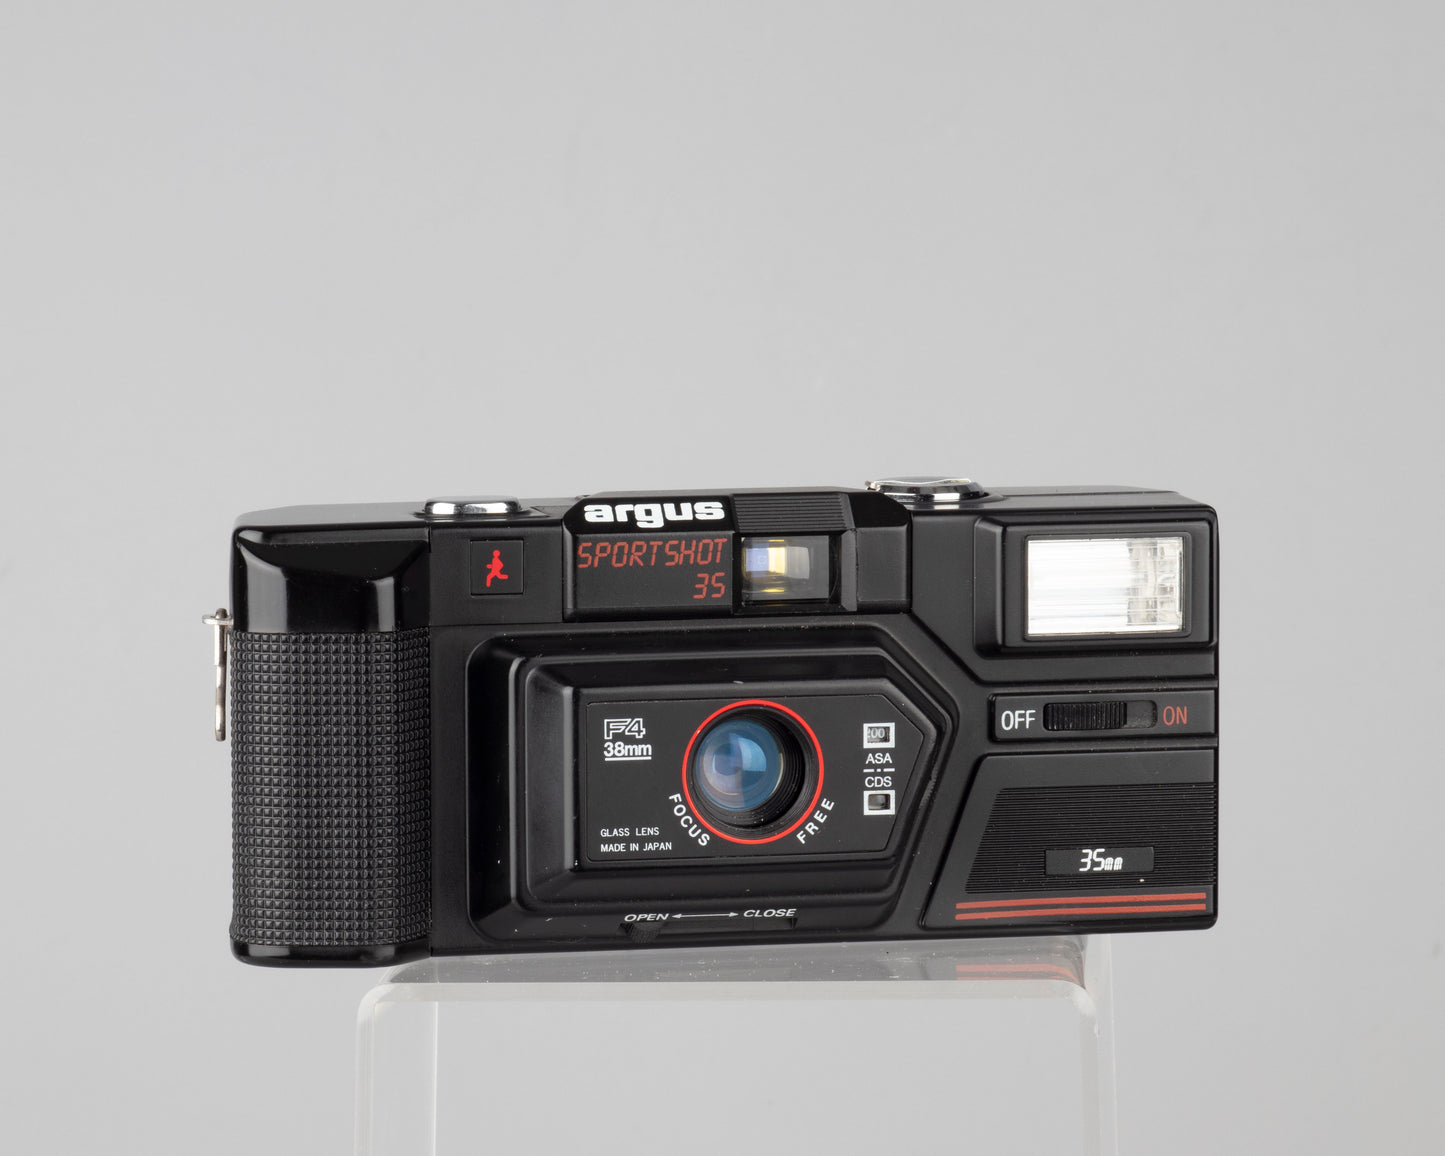 The Argus Sportshot 35 is a basic focus free 35mm point-and-shoot from the 1980s 